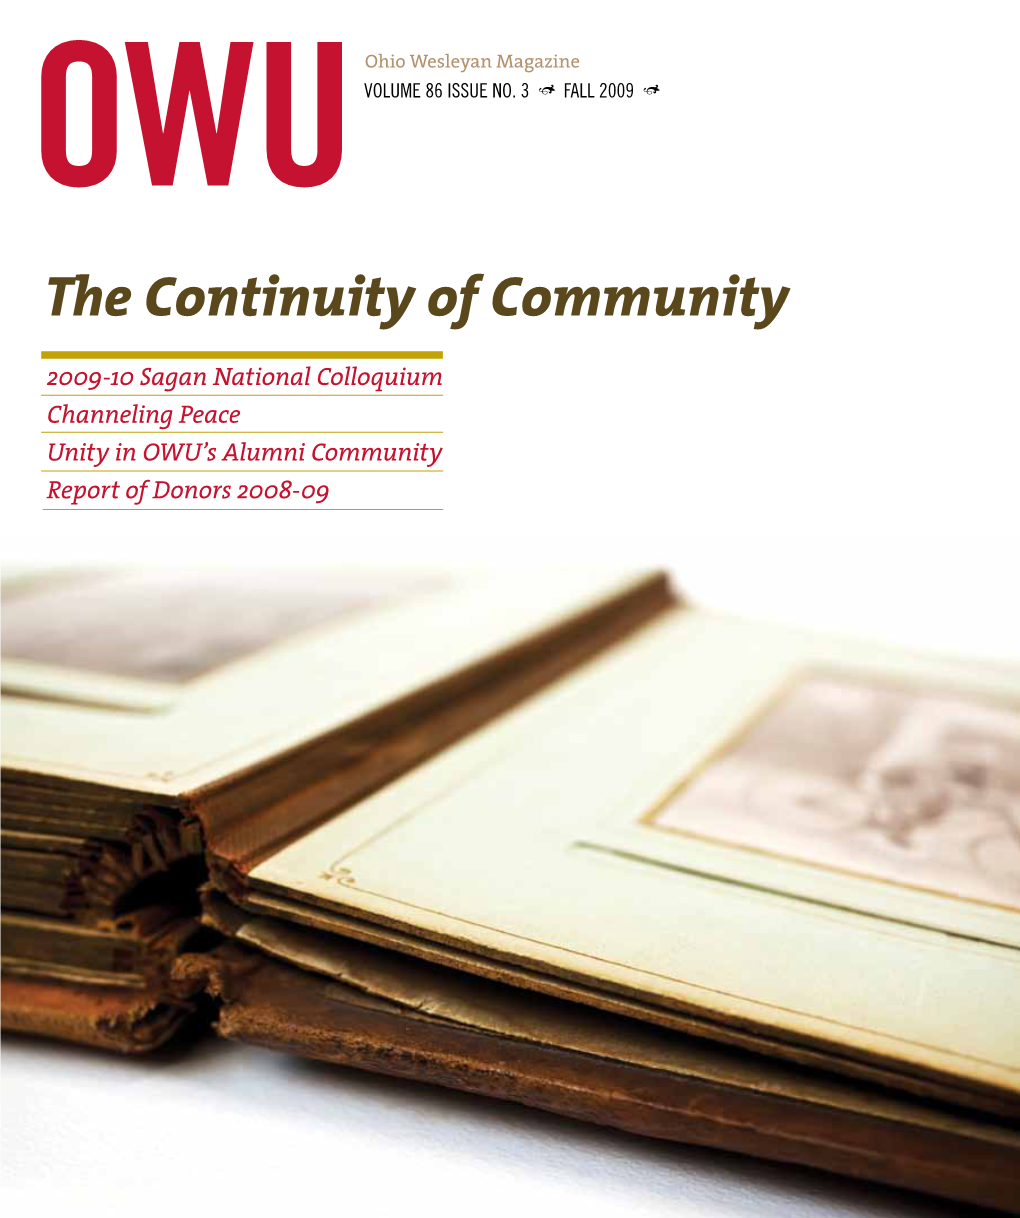 The Continuity of Community